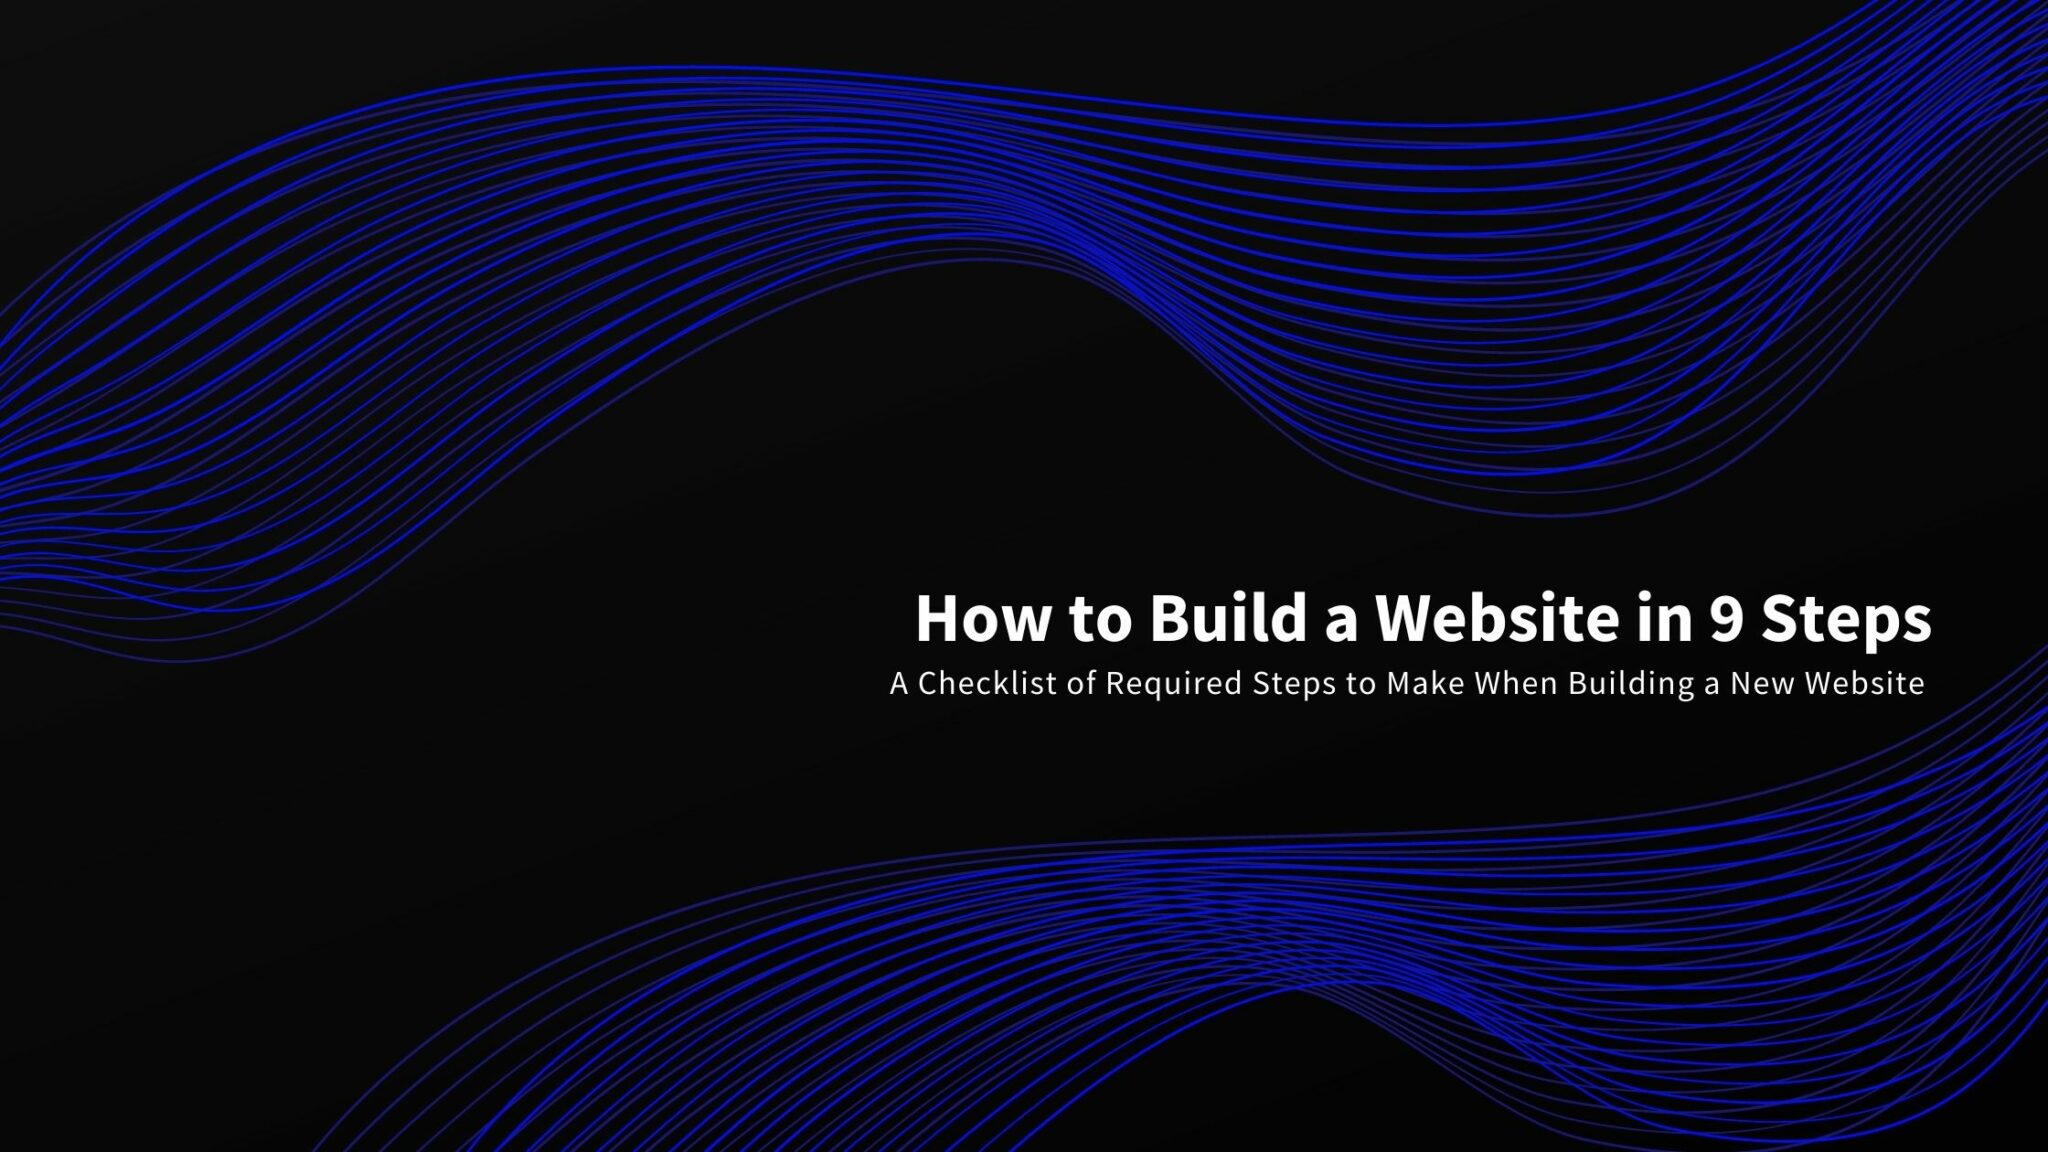 How To Build a New Website in 9 Steps